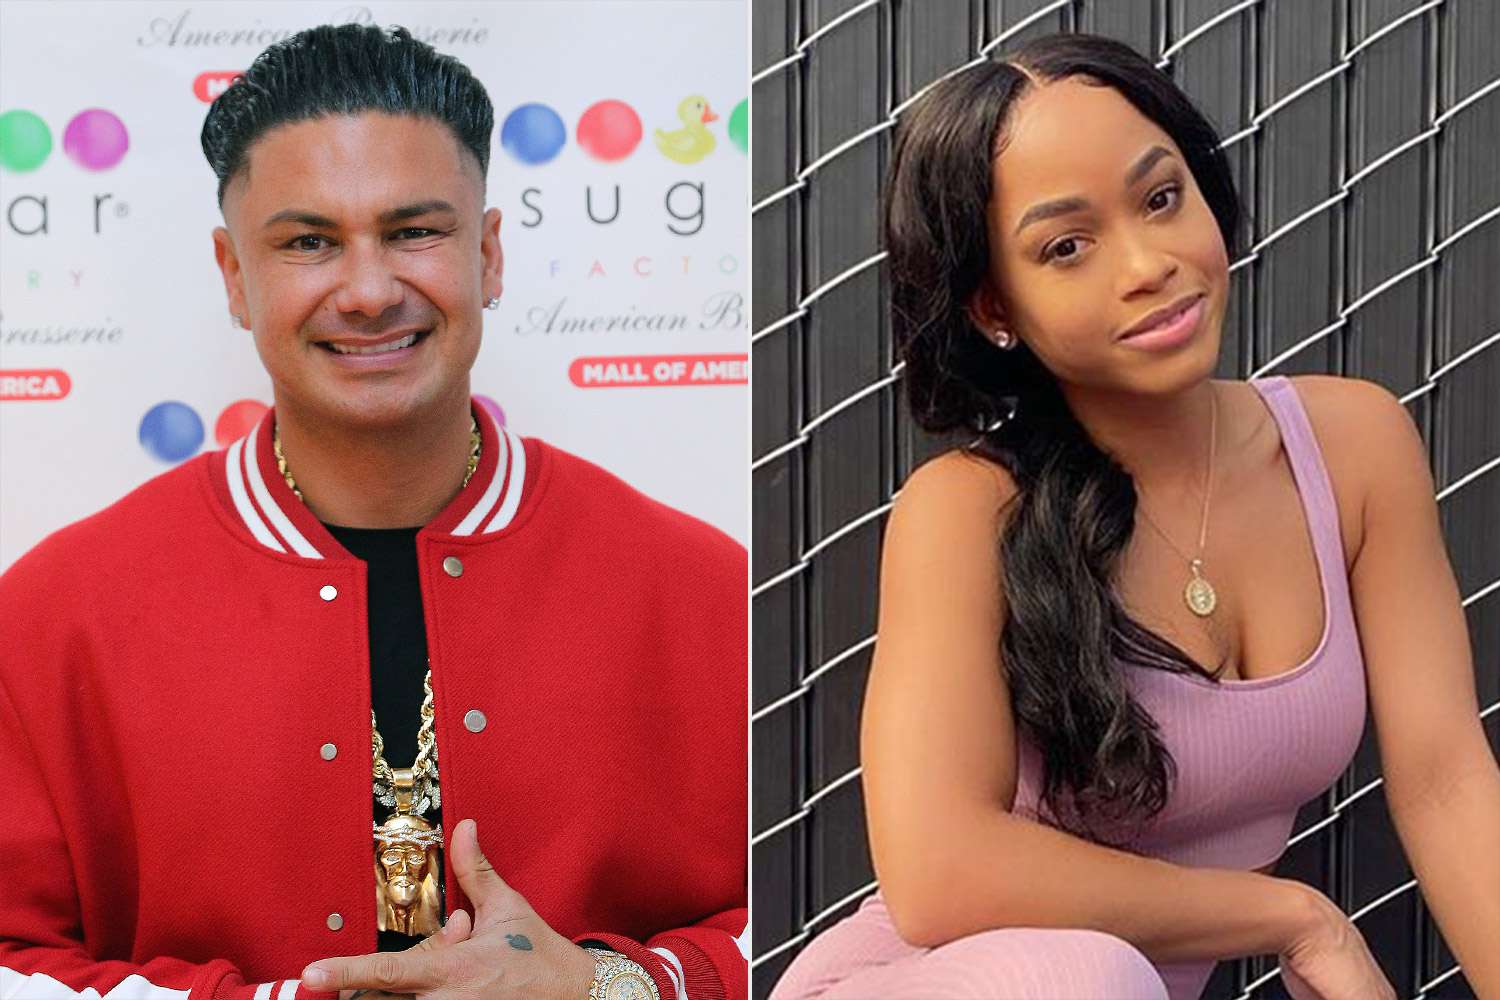 Pauly DelVecchio Introduces Girlfriend Nikki Hall To Jersey Shore.